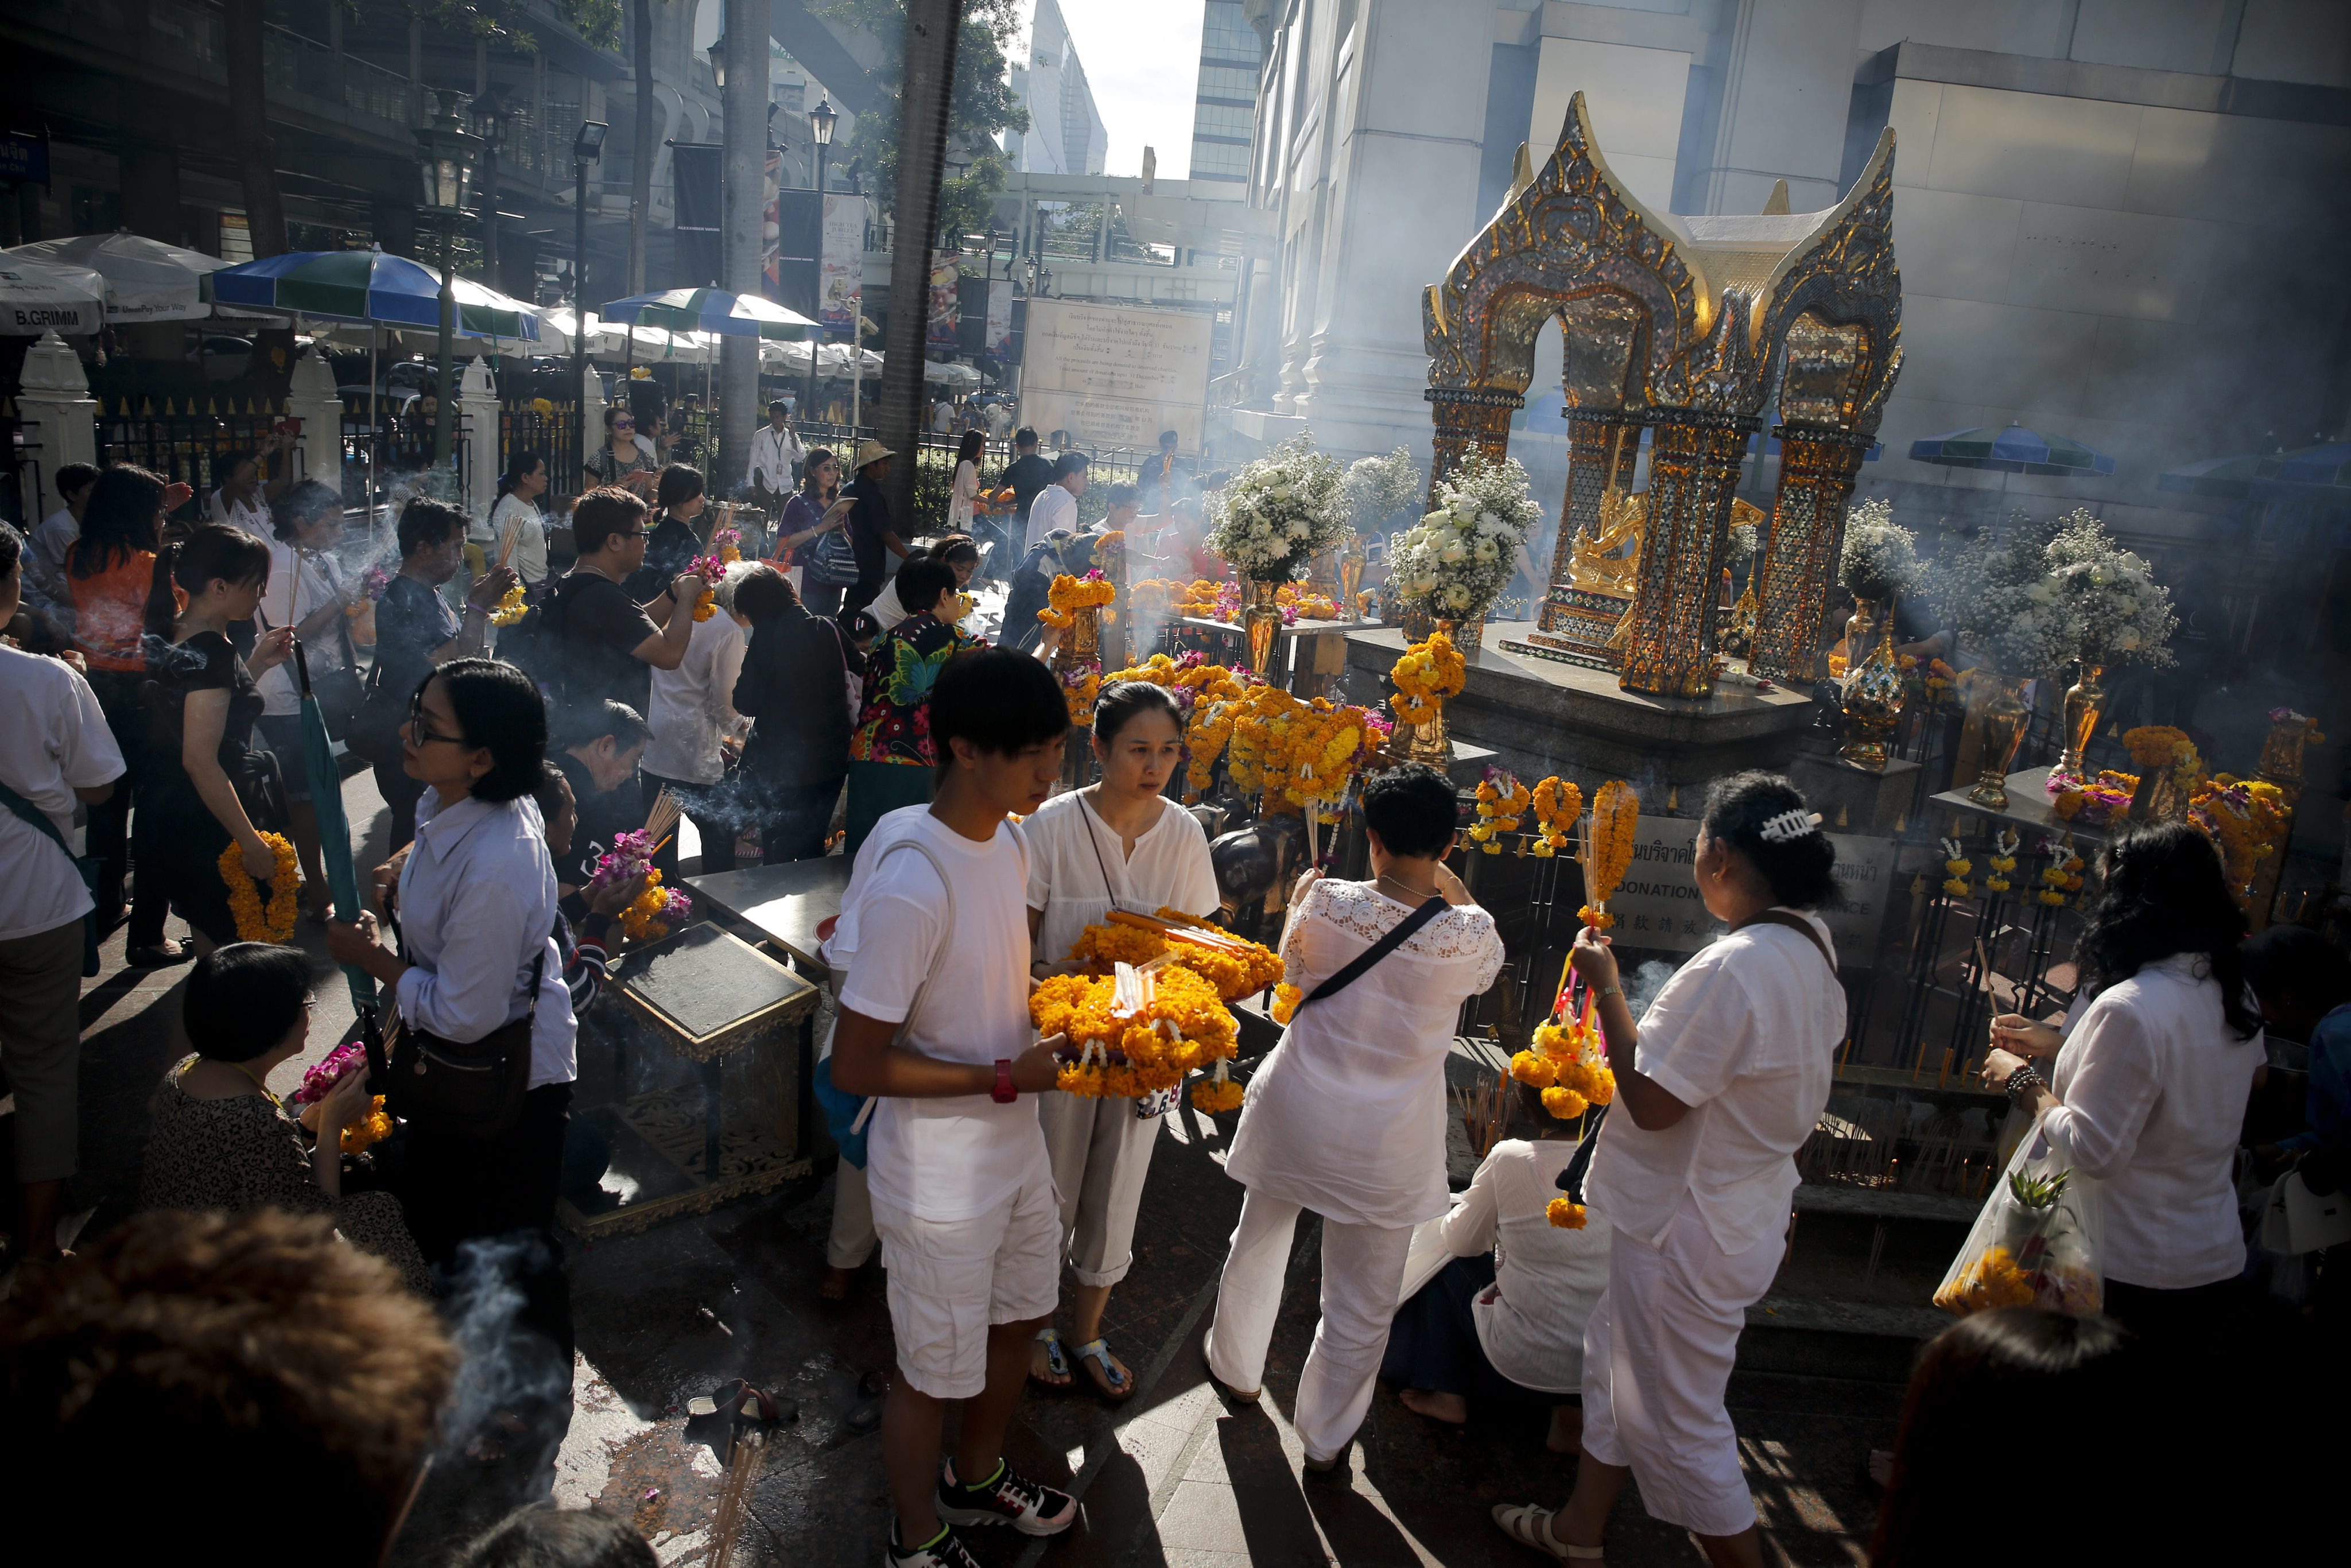 epa04912019 People pray at the Erawan Shrine after Brahmin priests performed a religious ceremony to worship the Lord Brahma statue after it was renovated following the deadly bombing of 17 August, in Bangkok, Thailand, 04 September 2015. The casualty figures from the deadly attack outside the Erawan Shrine on 17 August stood at 20 dead and 123 injured according to the Erawan Medical Centre. EPA/DIEGO AZUBEL